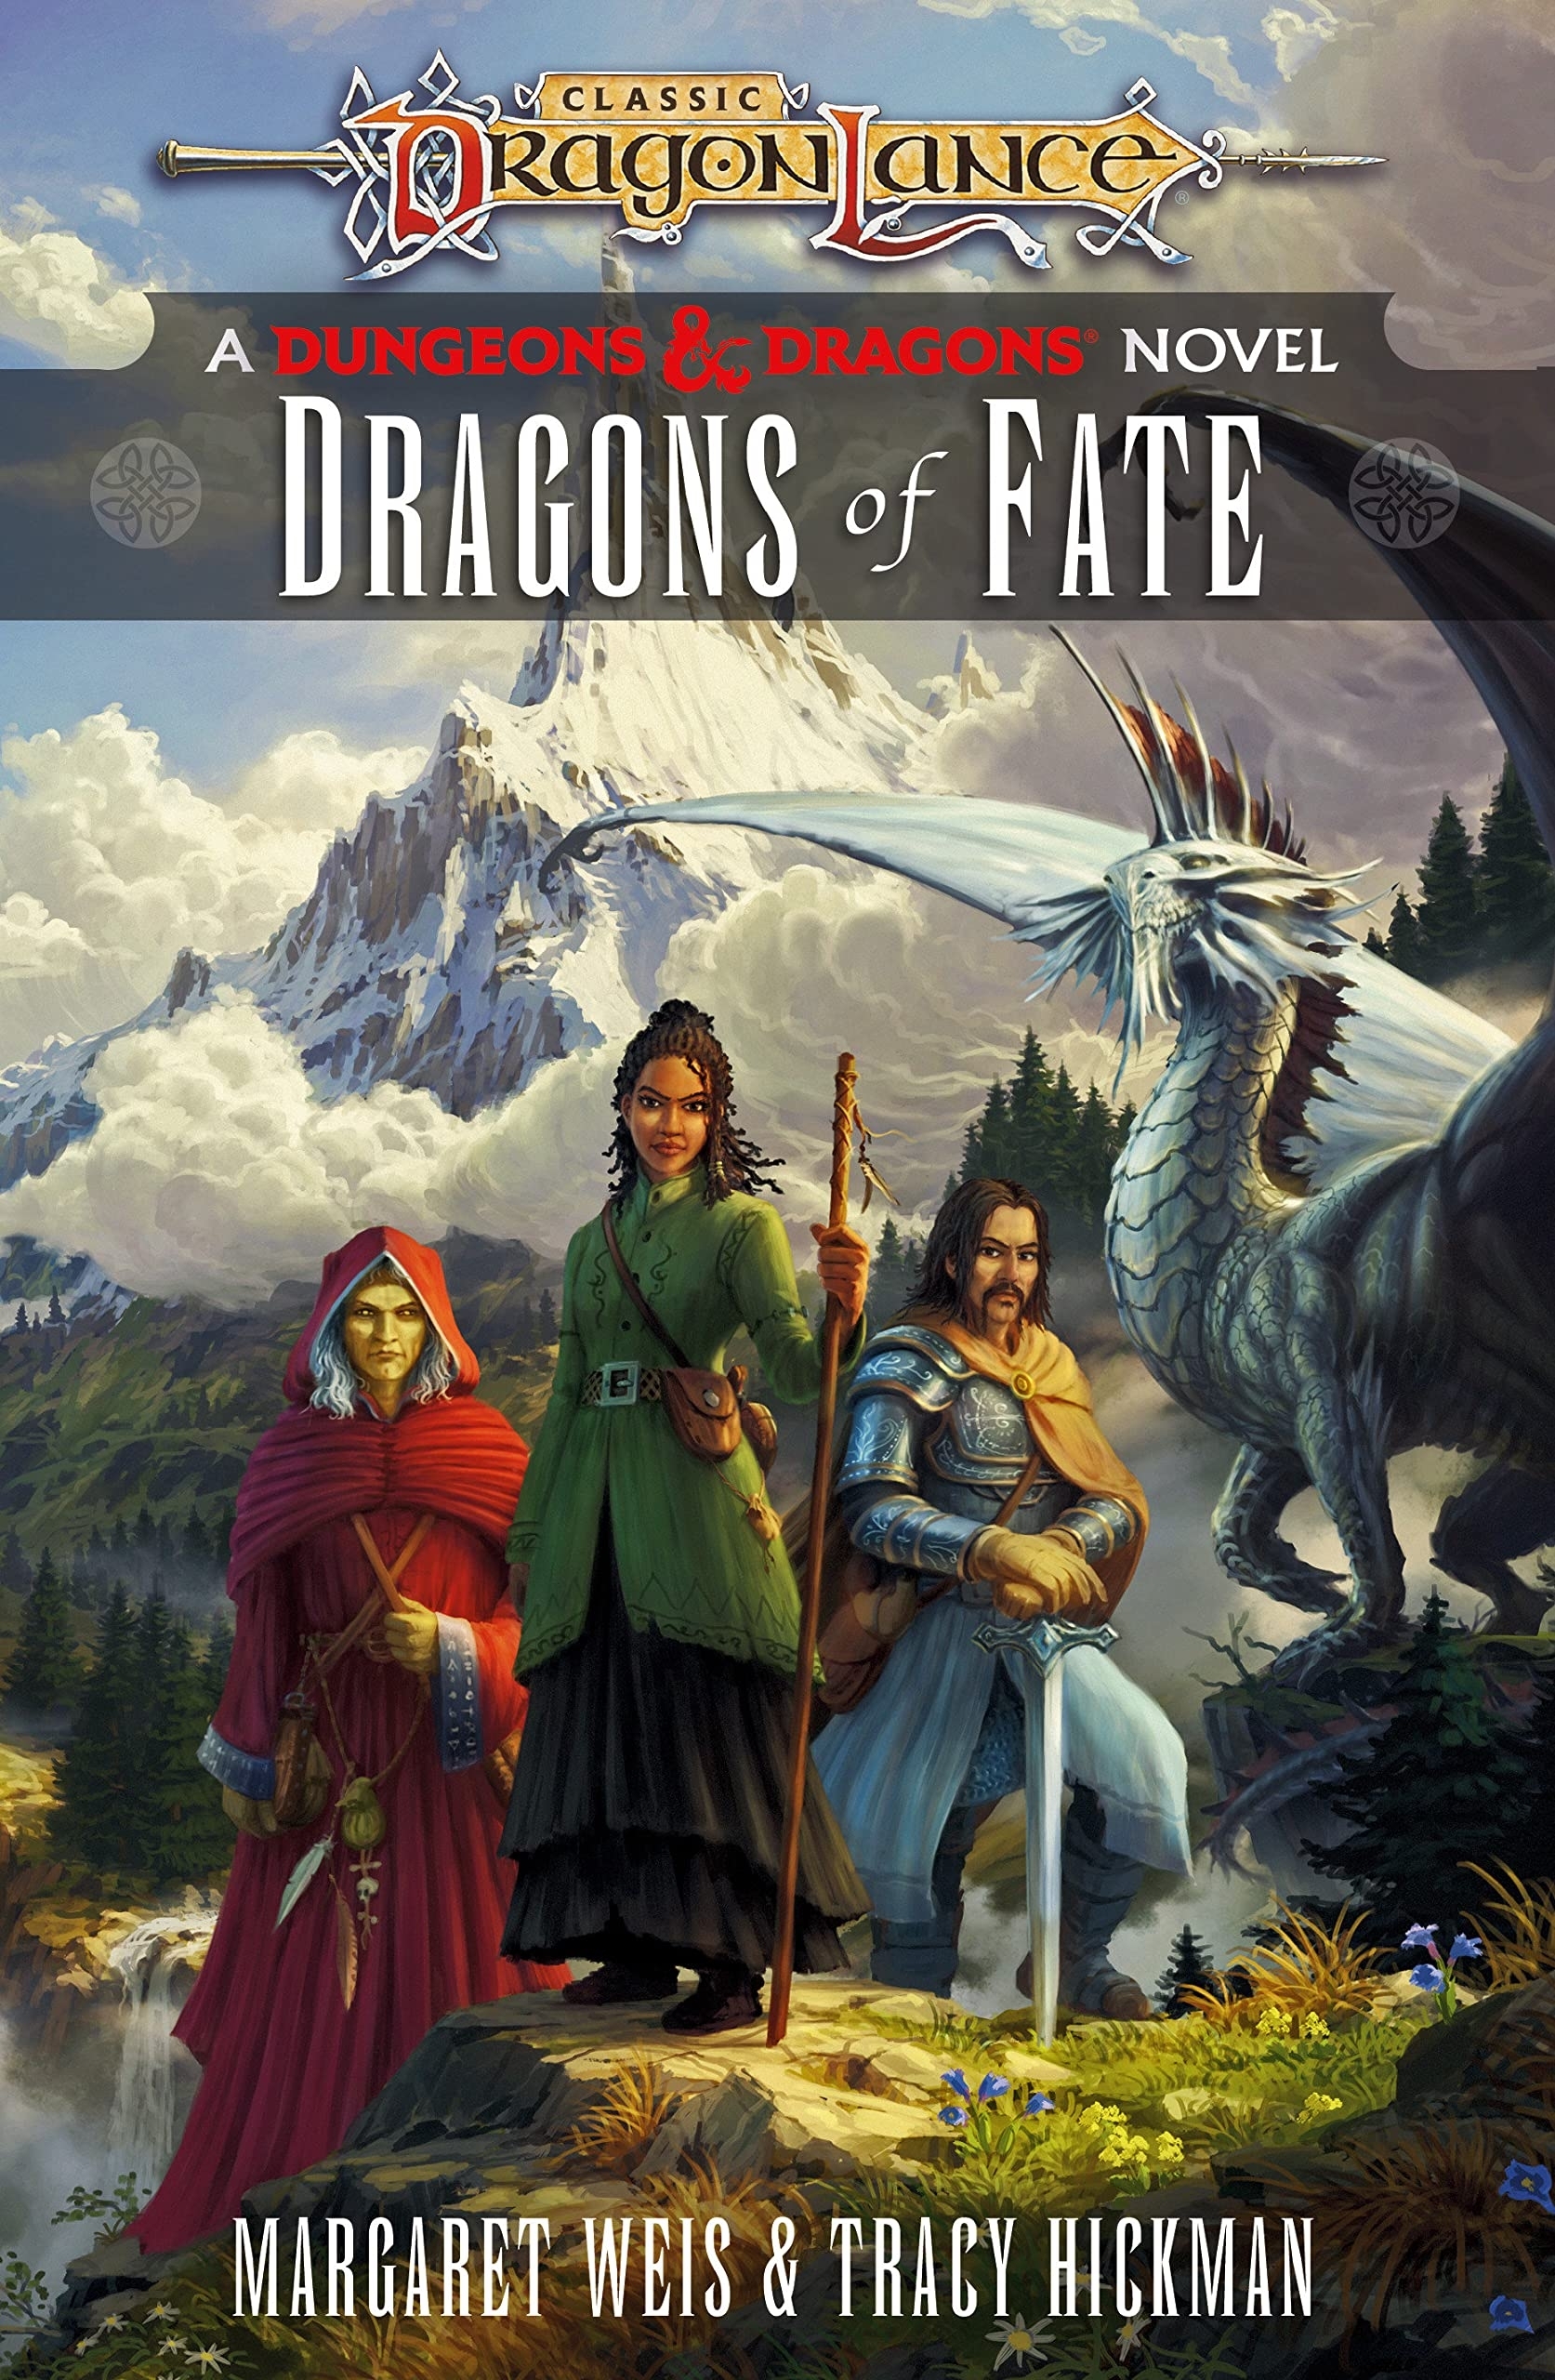 Dragonlance: Dragons of Fate (Dungeons & Dragons)